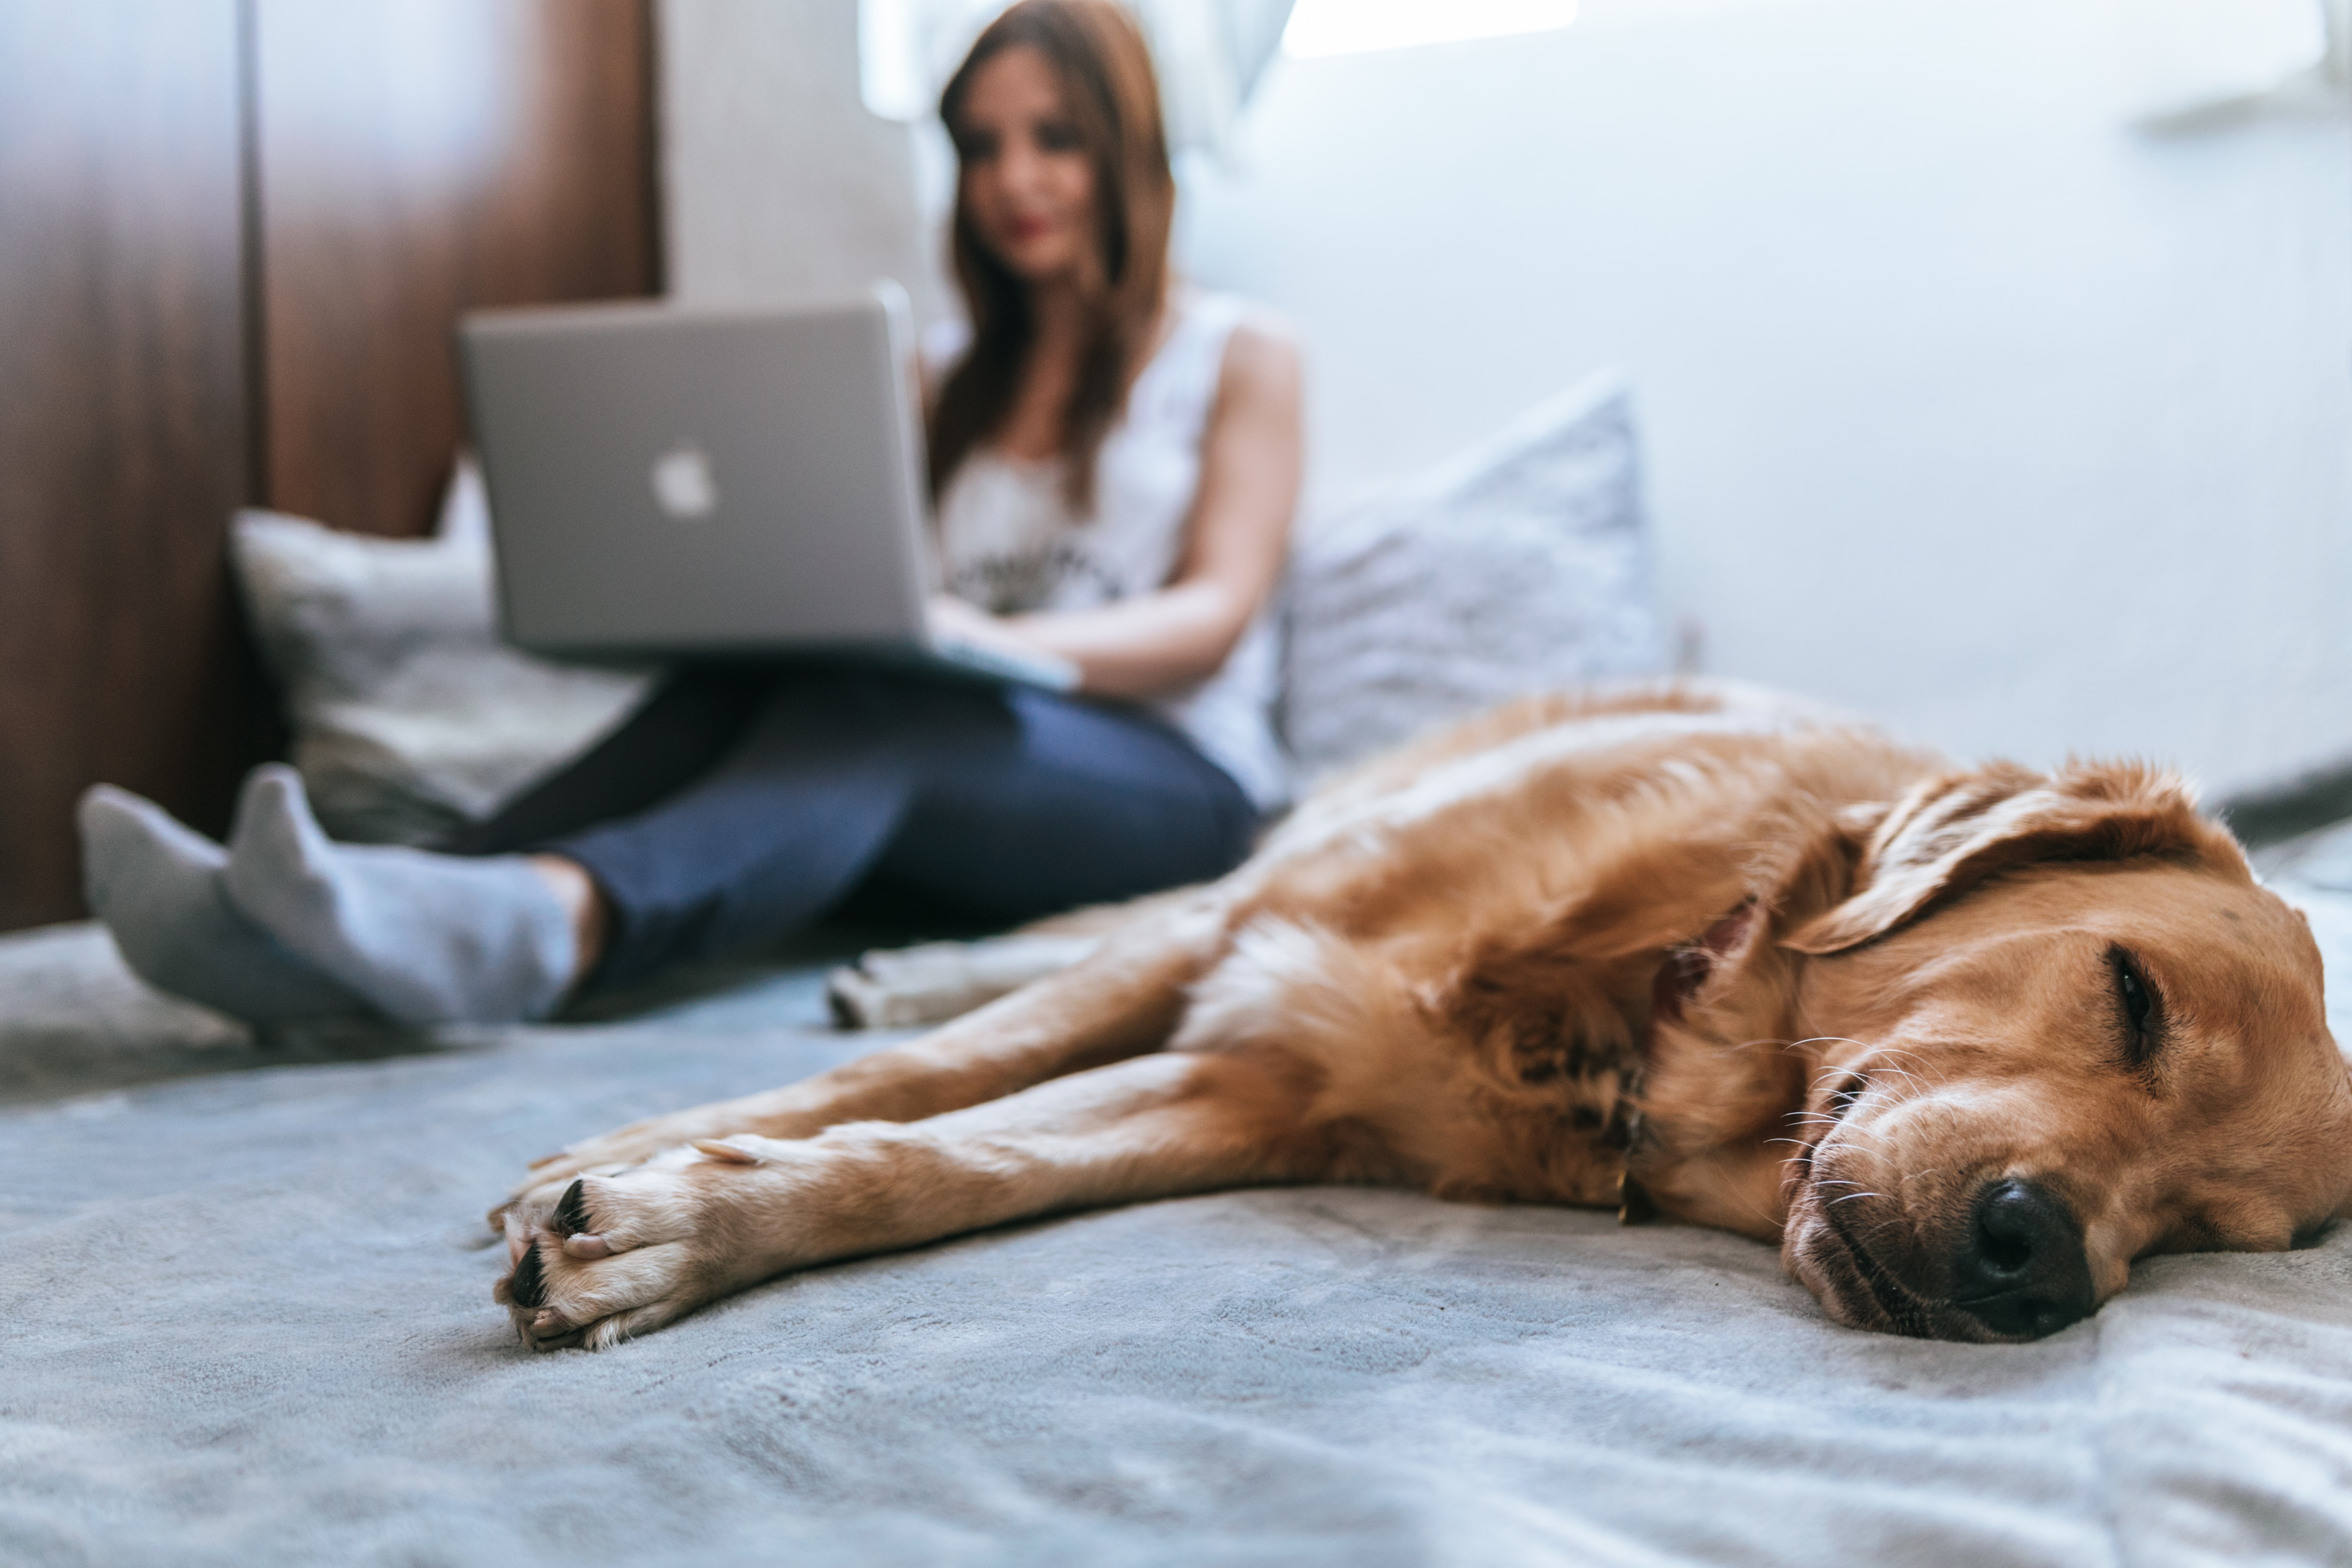 woman sits on floor on laptop in background with dog sleeping in foregroudn